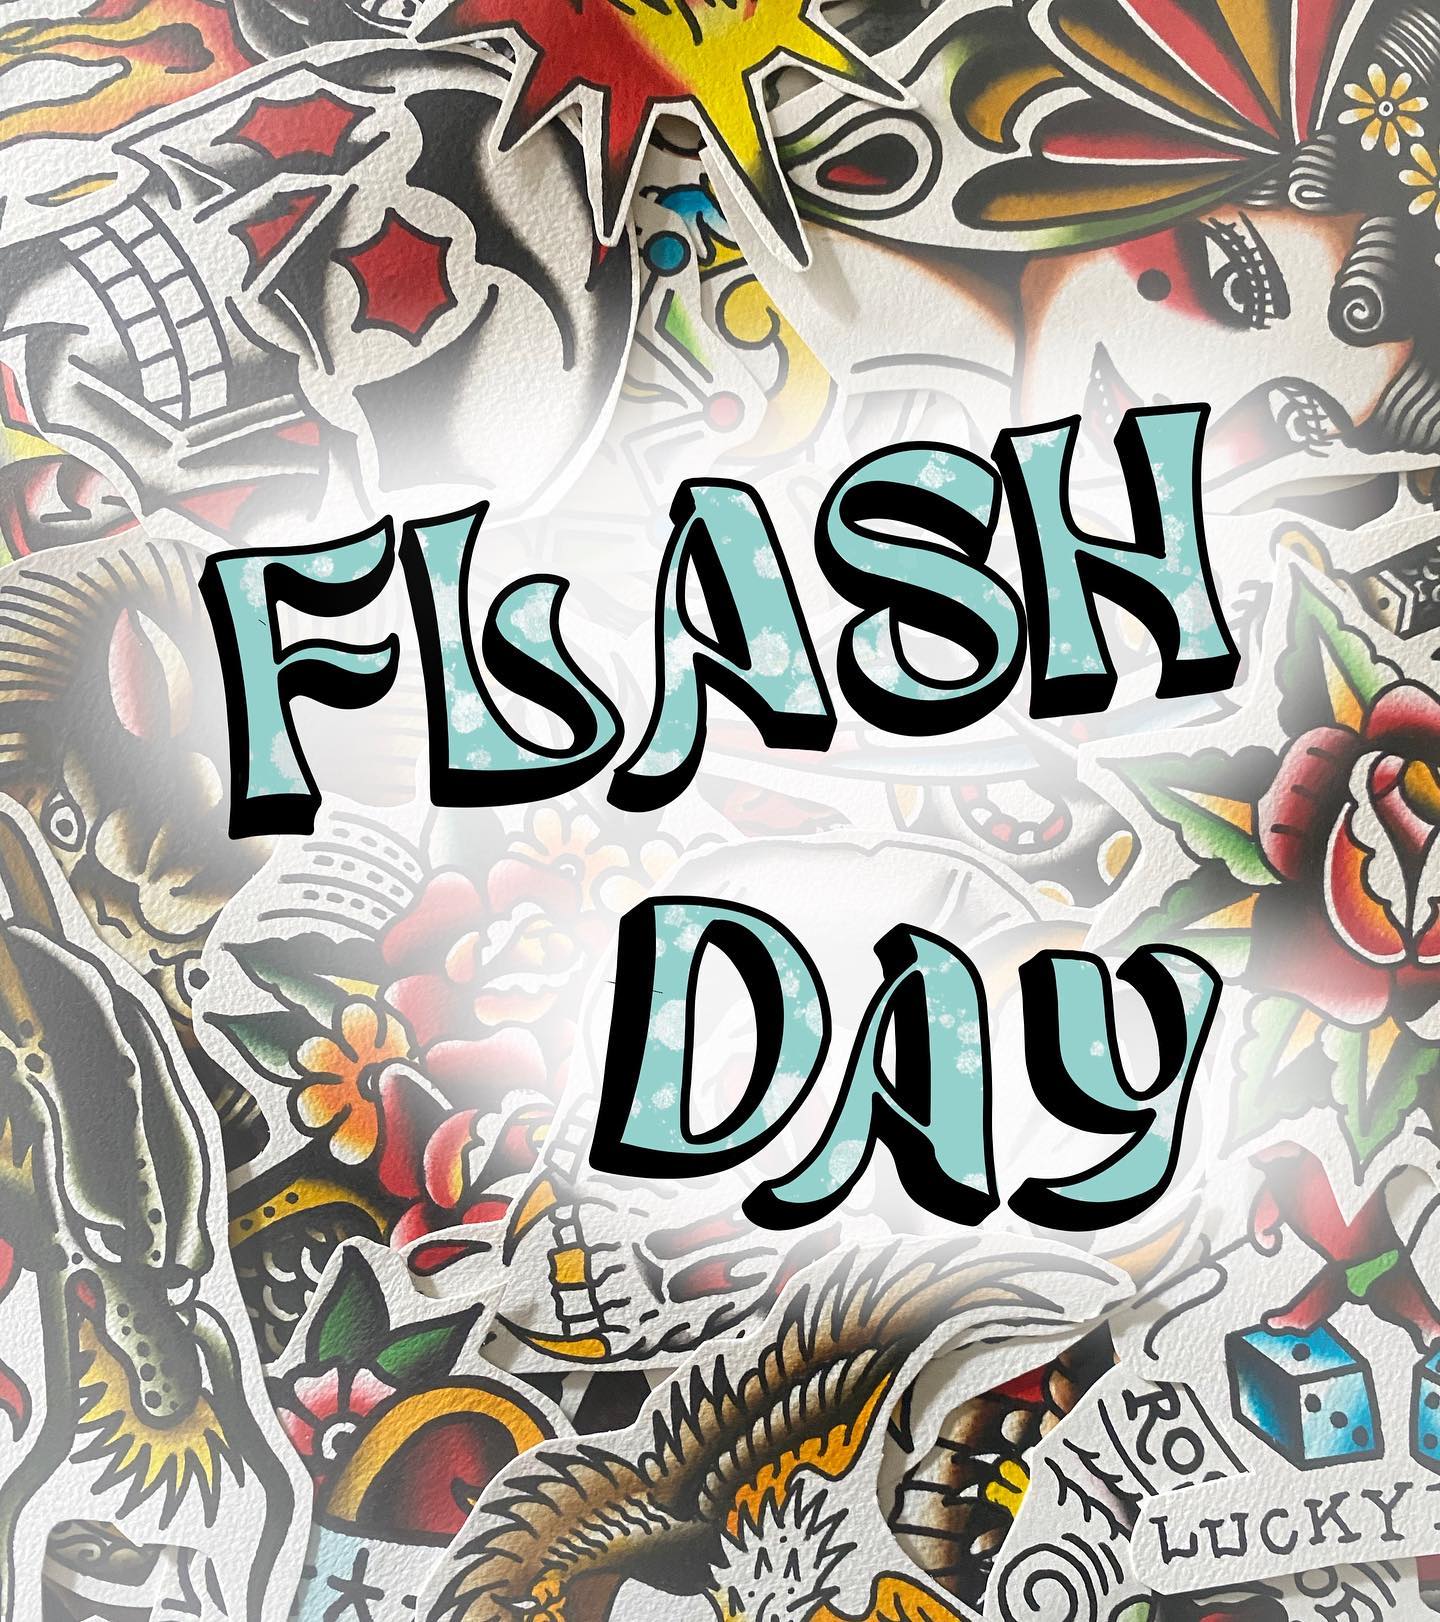 💥💥💥💥FLASH DAY 💥💥💥💥

Thursday 1st June - 12 till 6
All designs will be £80 black or colour 
Arms and legs only
First come first served 
Limited spaces so come early so you don’t miss out!! 

.
.
.
.
.
.
                 